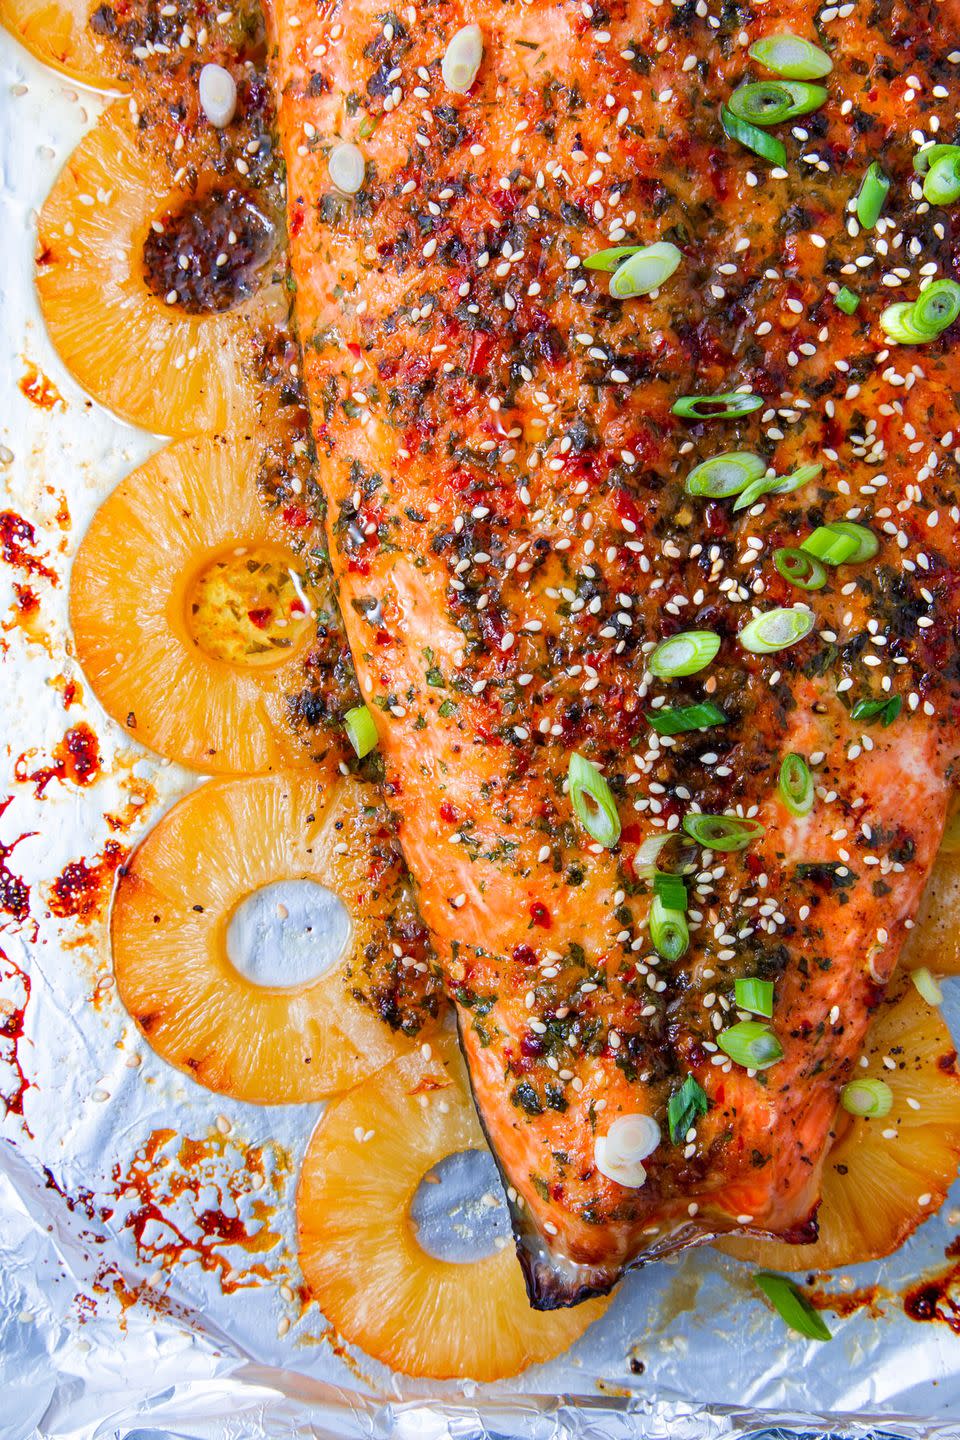 <p>Giving the salmon a quick broil at the end of cooking gives the marinade a chance to caramelize—it's too good. Just make sure to keep a close eye on it so you don't overcook the salmon! Two to three minutes is all you need under a hot broiler.</p><p>Get the <strong><a href="https://www.delish.com/cooking/recipe-ideas/a26728380/baked-pineapple-salmon-recipe/" rel="nofollow noopener" target="_blank" data-ylk="slk:Pineapple Baked Salmon recipe" class="link ">Pineapple Baked Salmon recipe</a></strong>.</p>